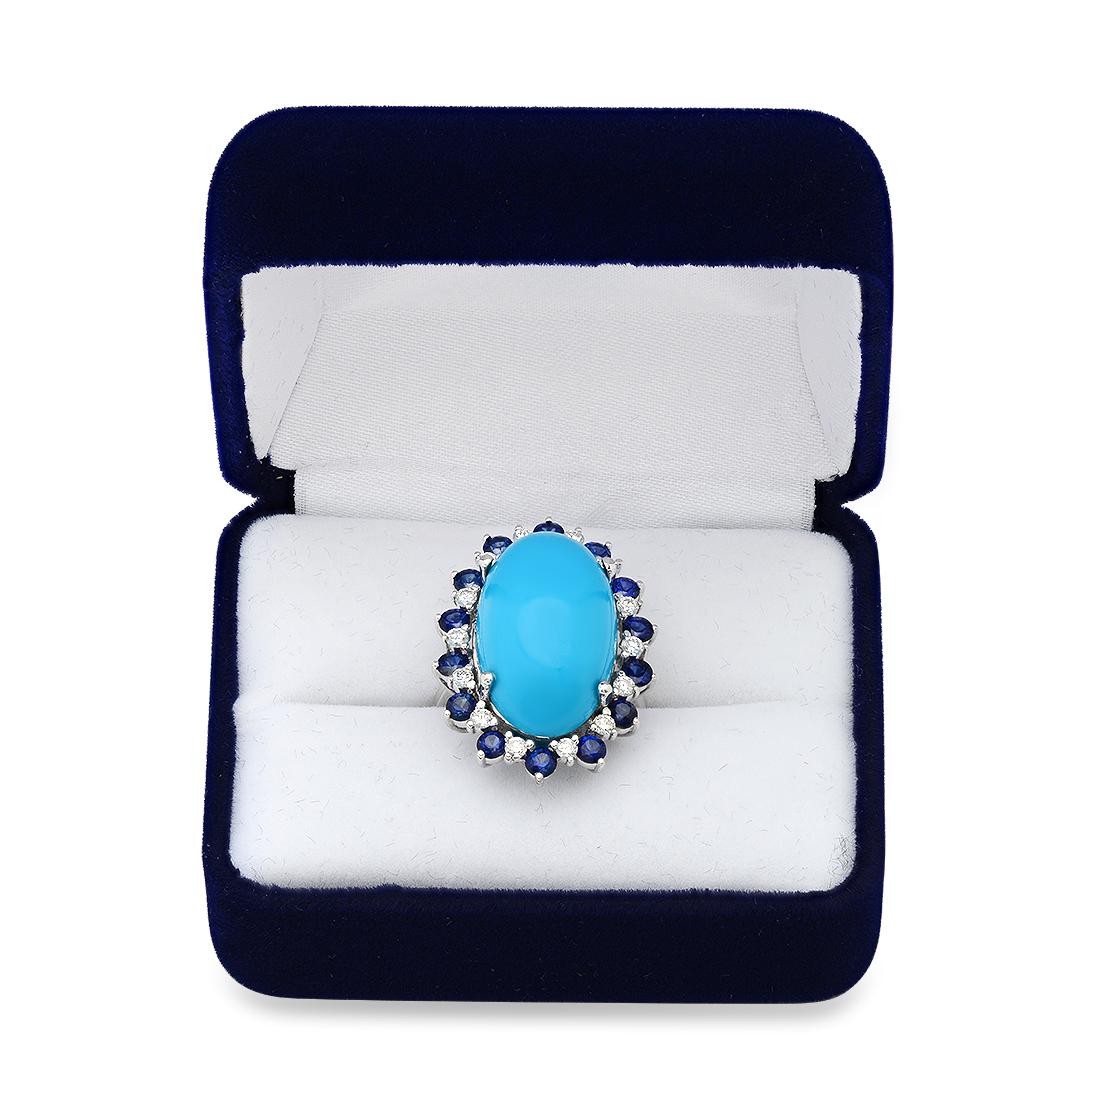 14K White Gold 16.95ct Turquoise 2.05ct Sapphire and 0.65ct Diamond Ring